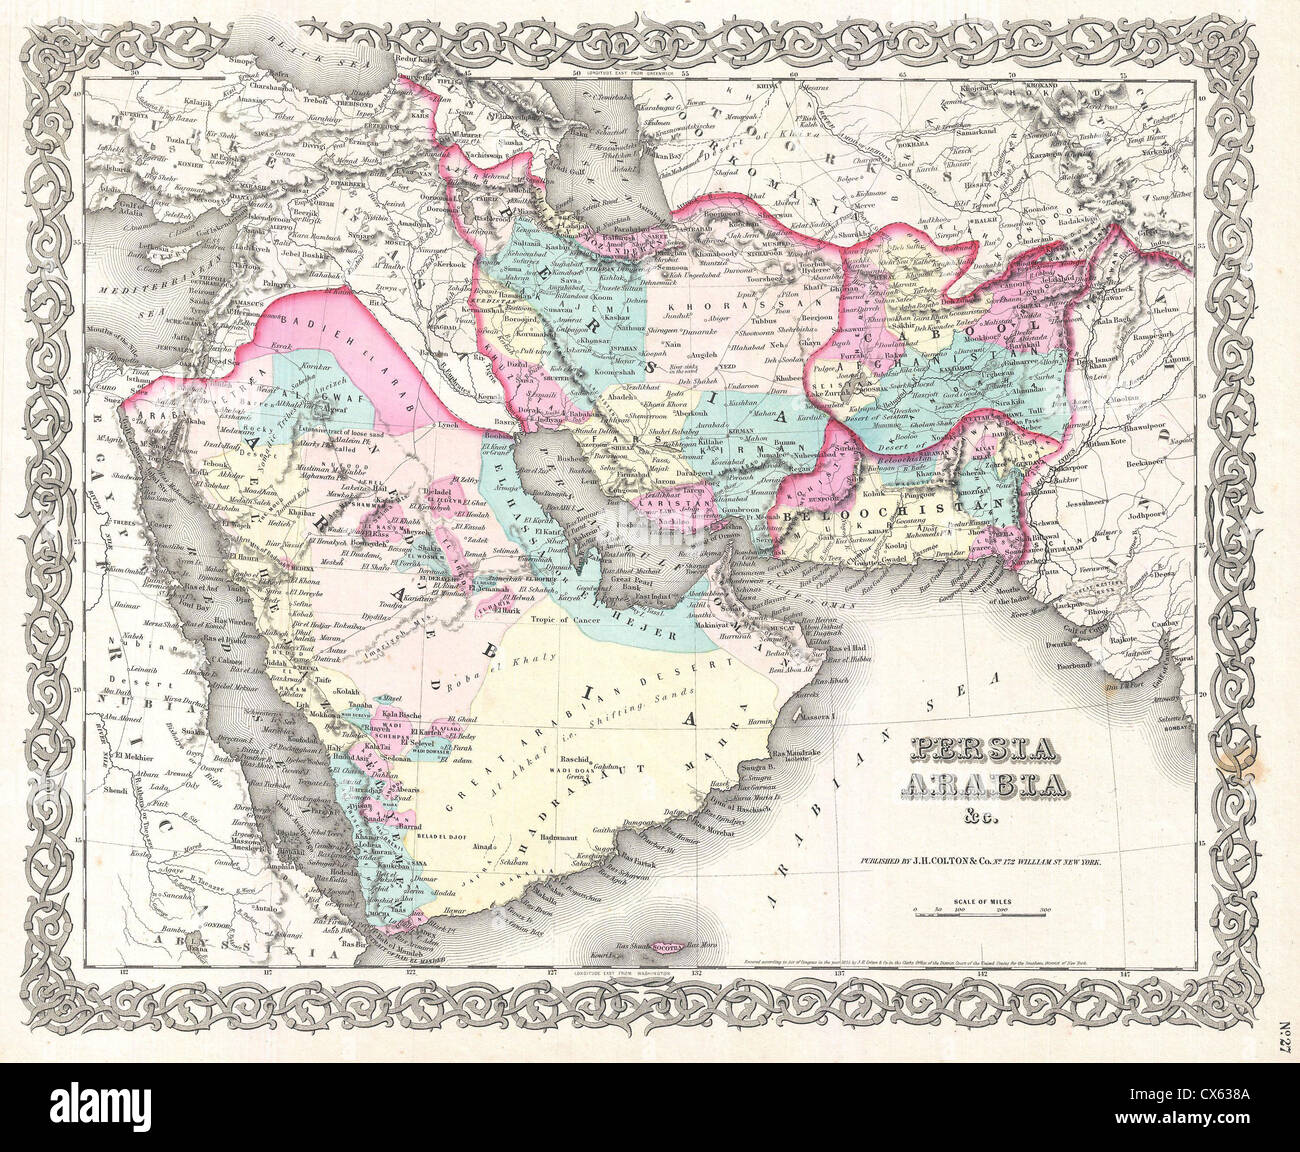 1855 Colton Map of Persia, Afghanistan, and Arabia Stock Photo